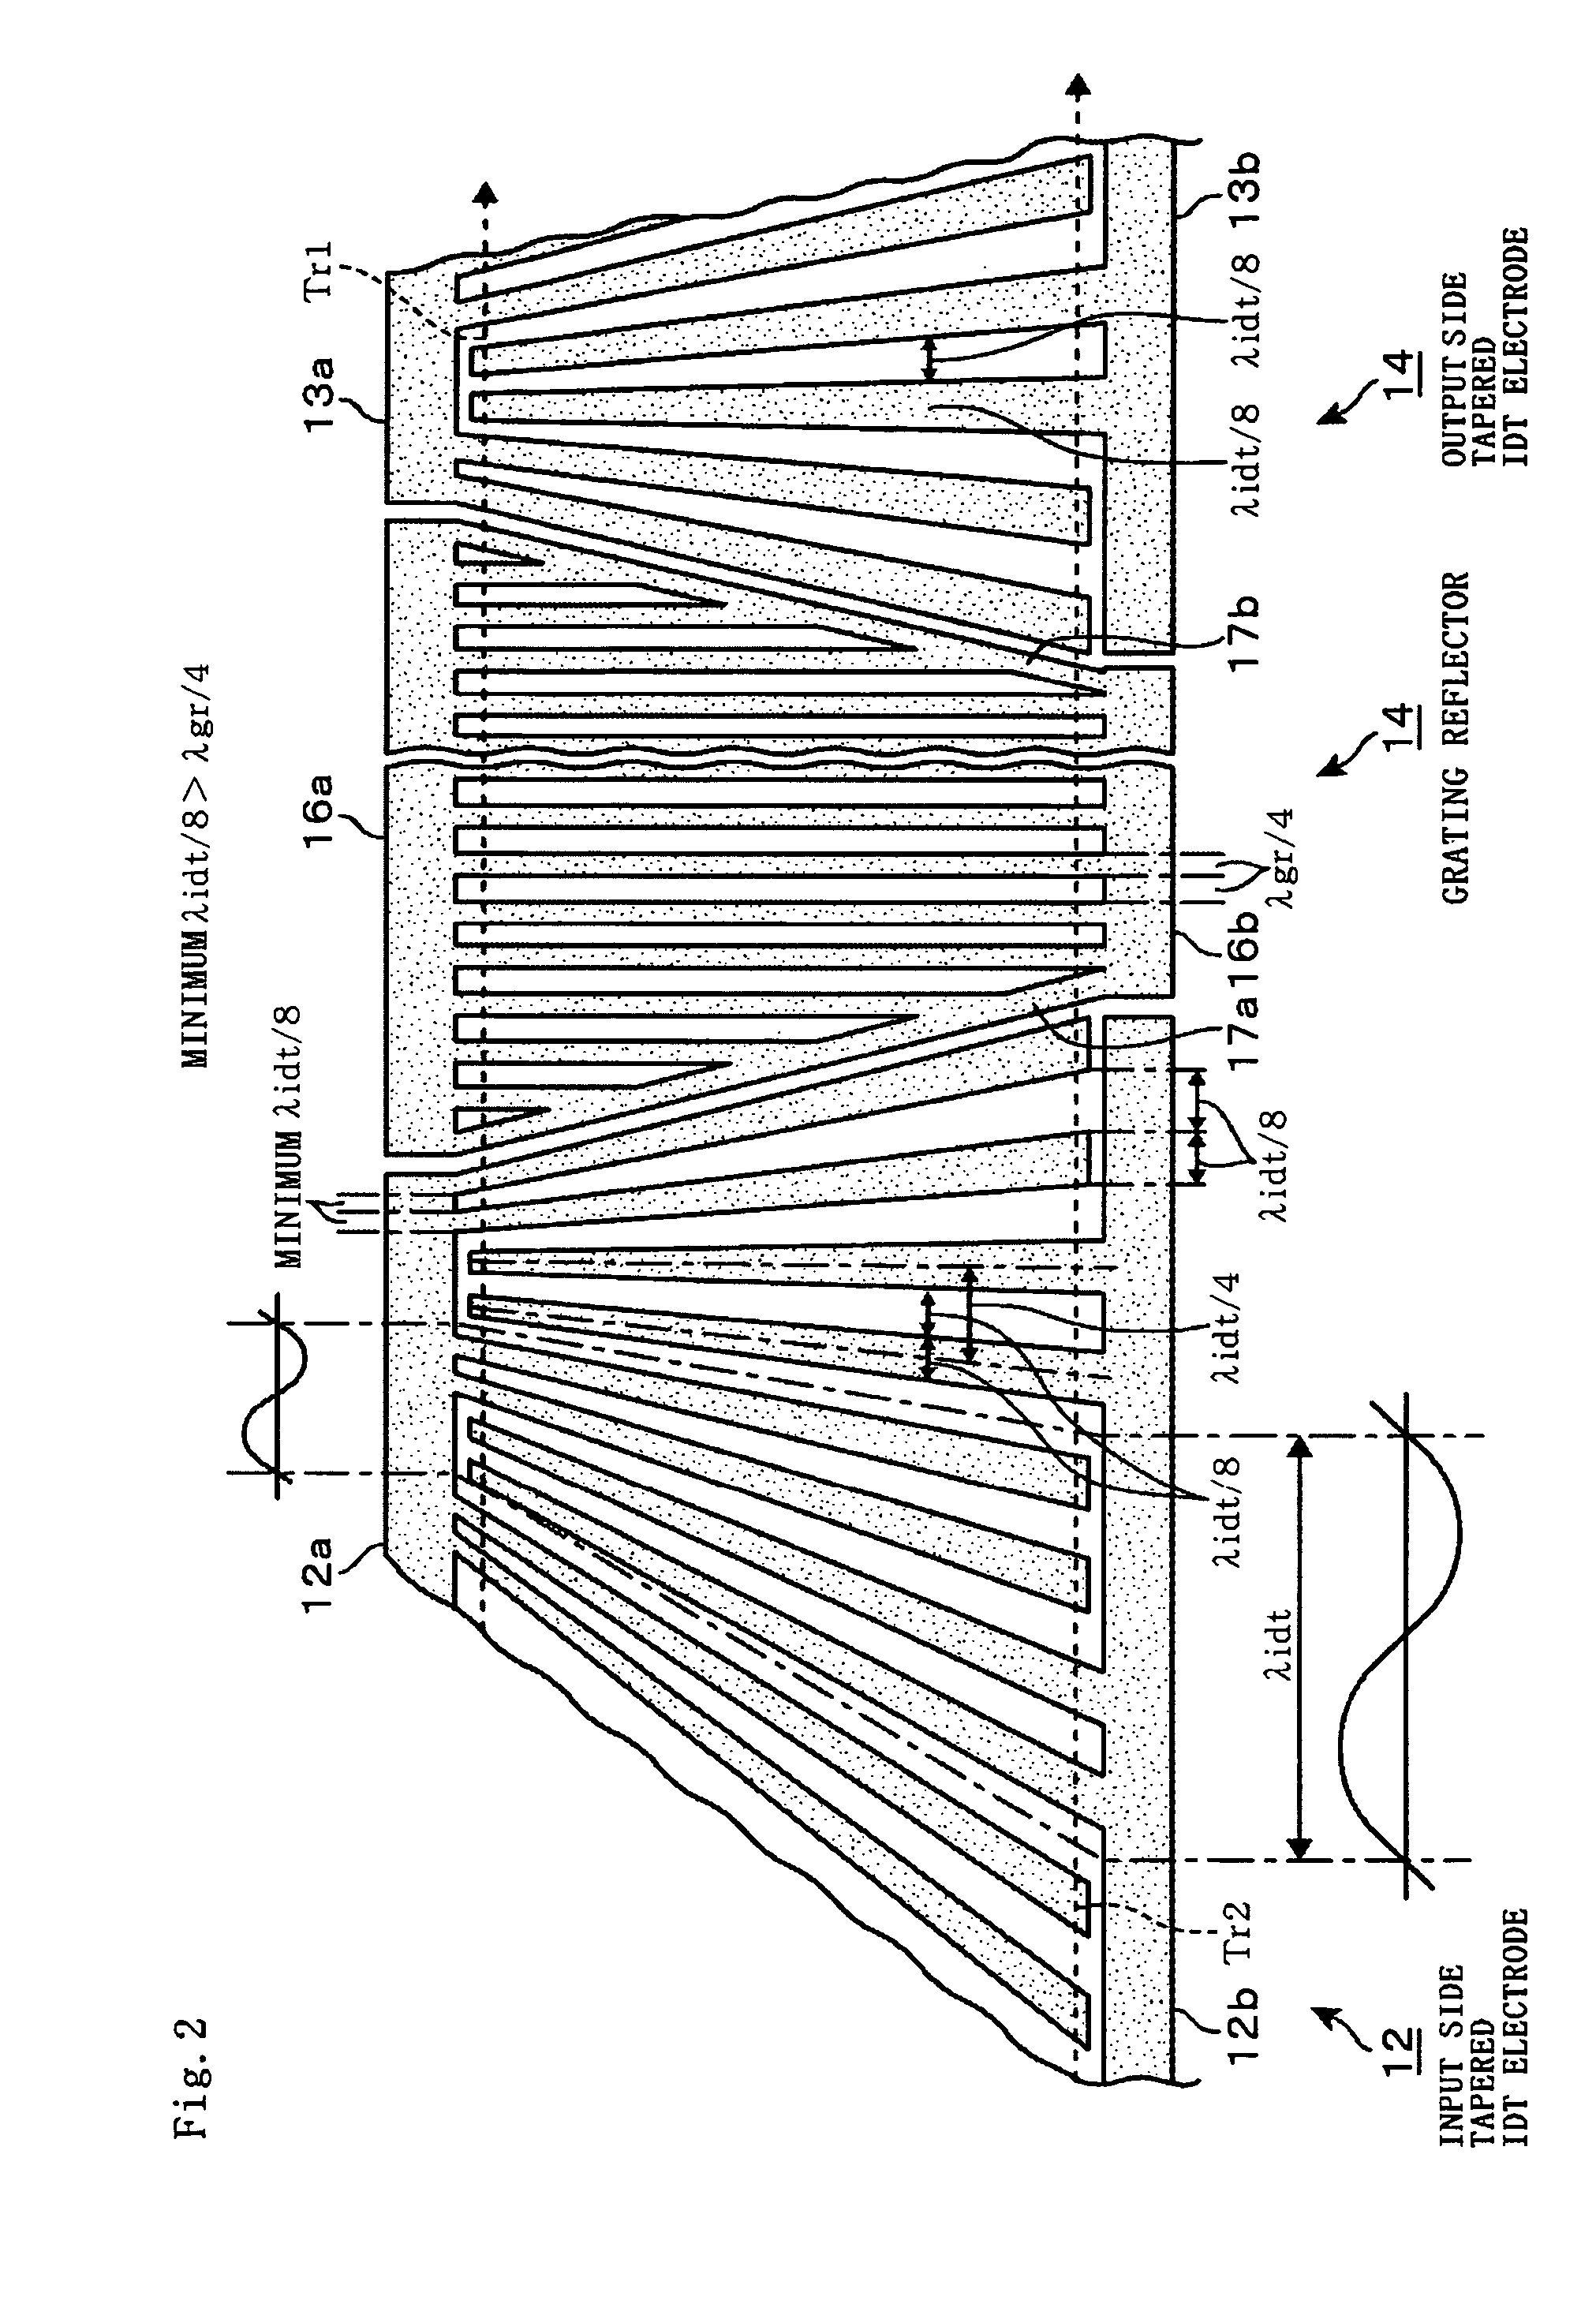 Elastic wave filter including a grating reflector between tapered input and output IDT electrodes